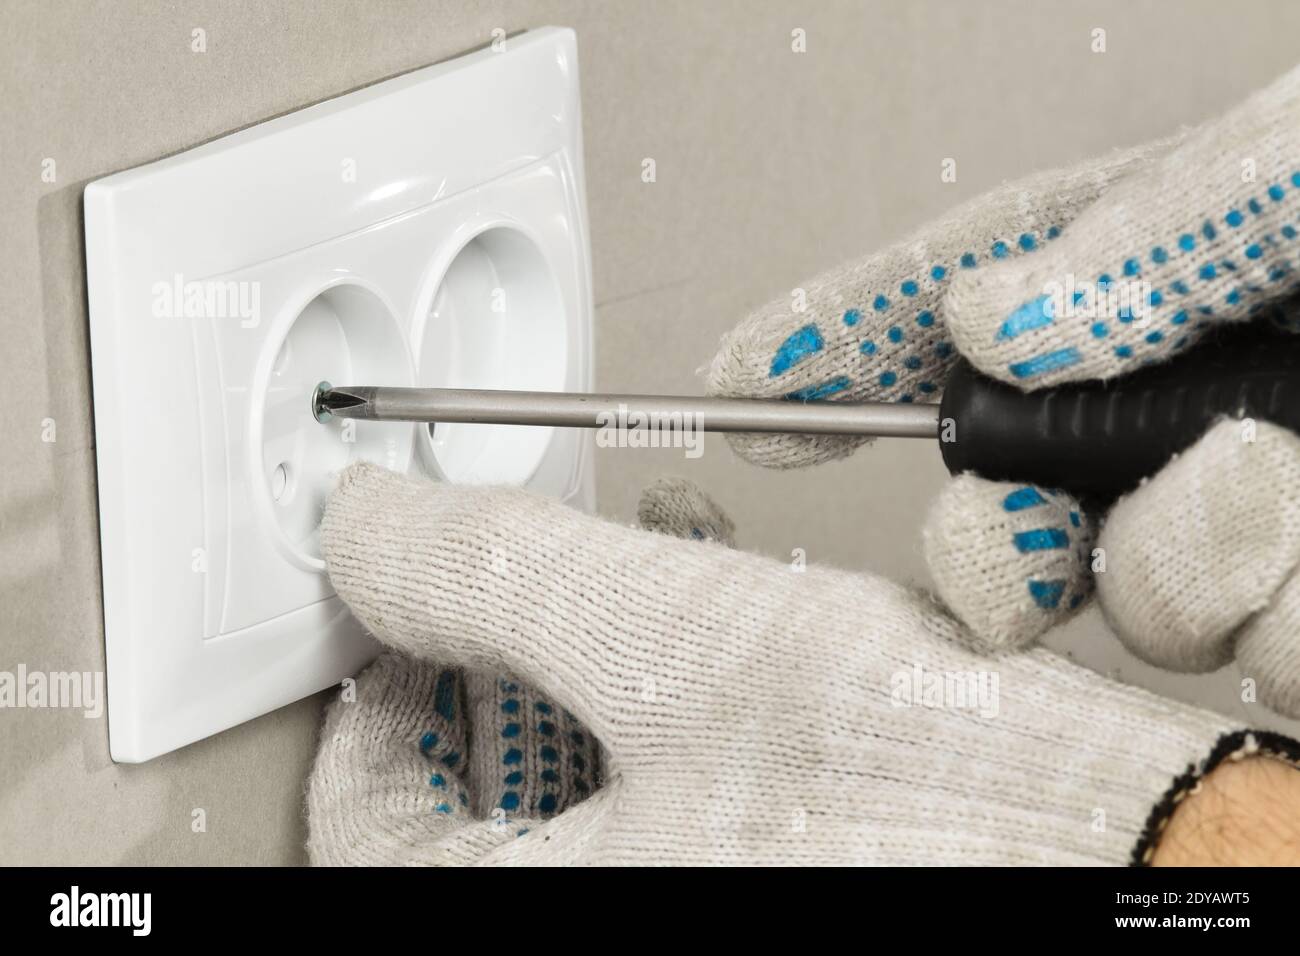 electrician's hands with a screwdriver fix the electrical outlet on drywall, closeup Stock Photo